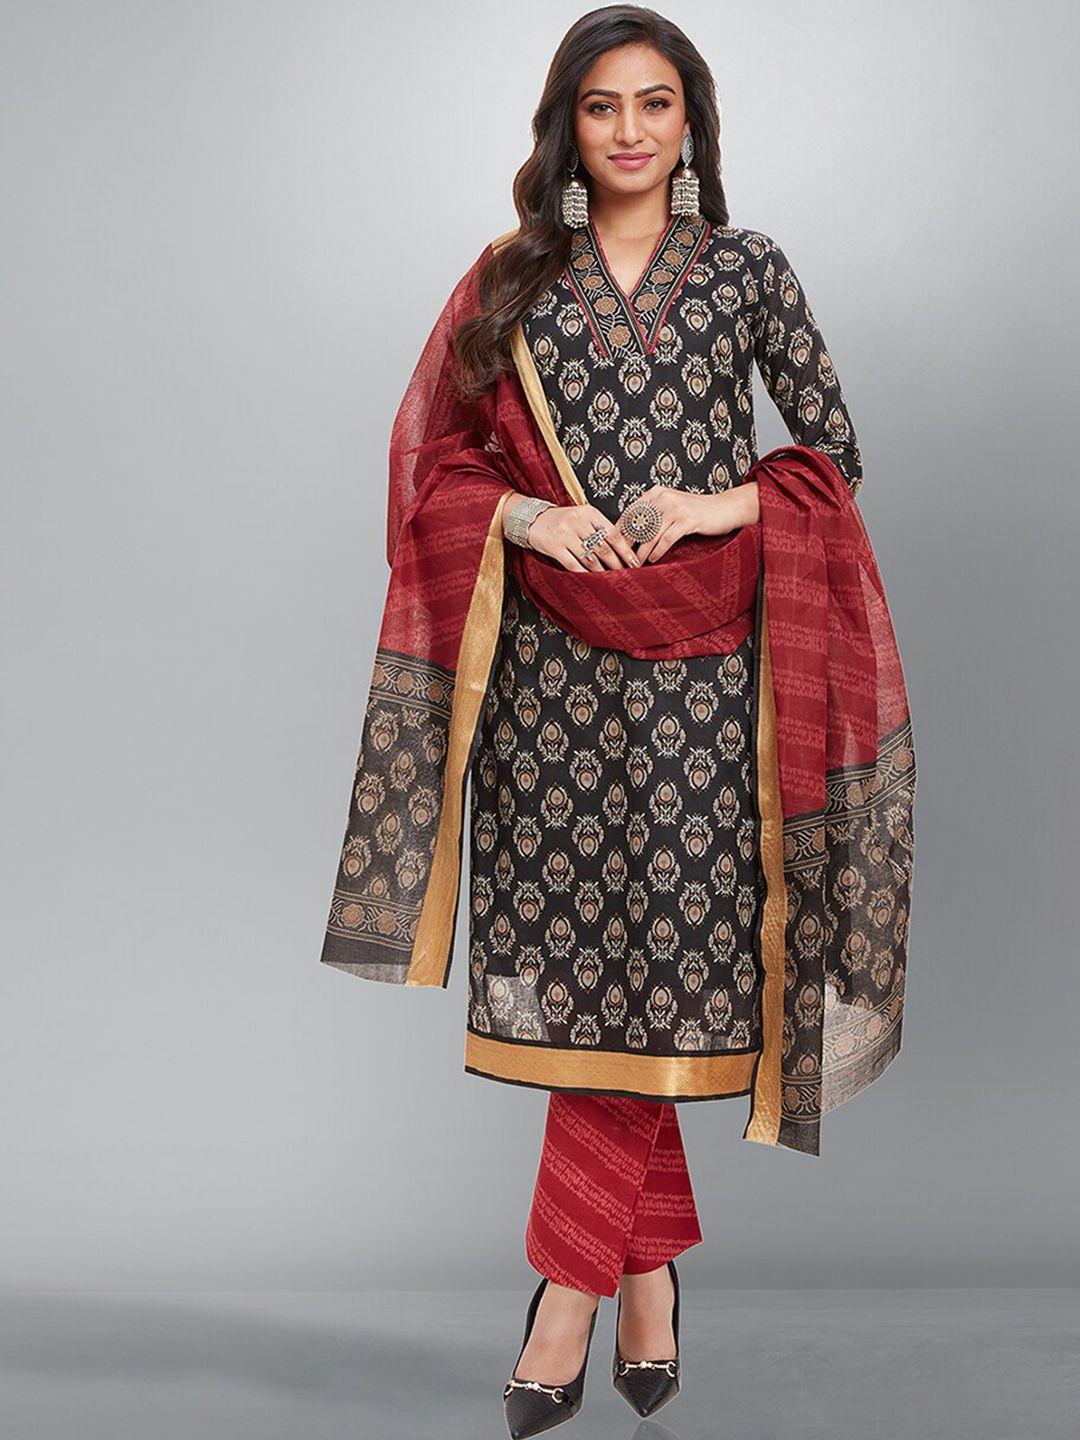 jevi prints ethnic motifs printed pure cotton kurta with trousers & with dupatta